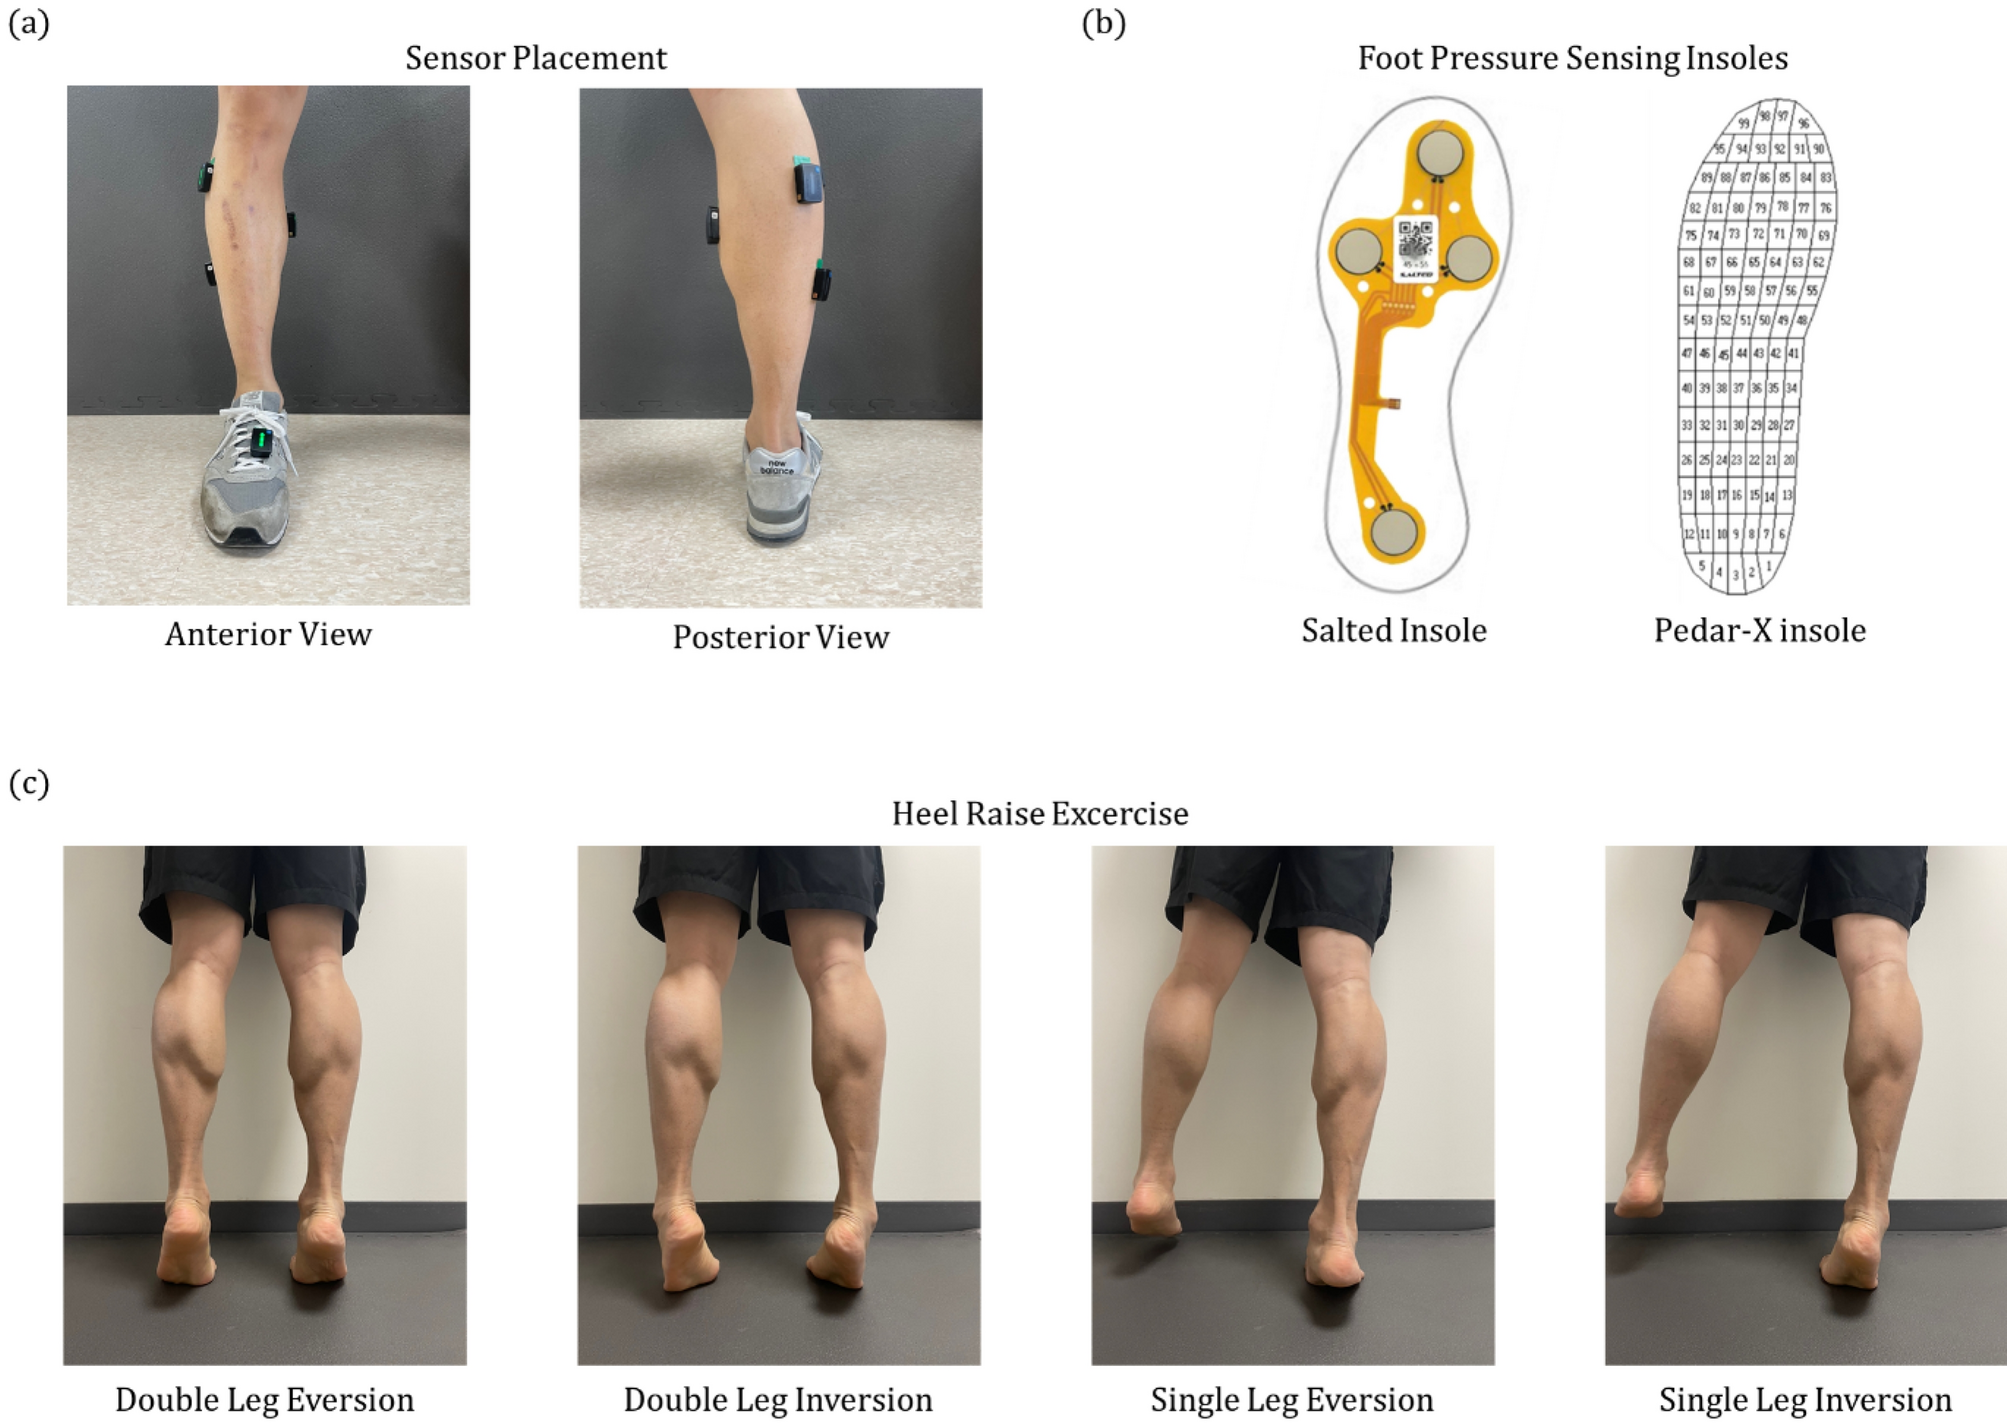 A smart insole system capable of identifying proper heel raise posture for  chronic ankle instability rehabilitation | Scientific Reports